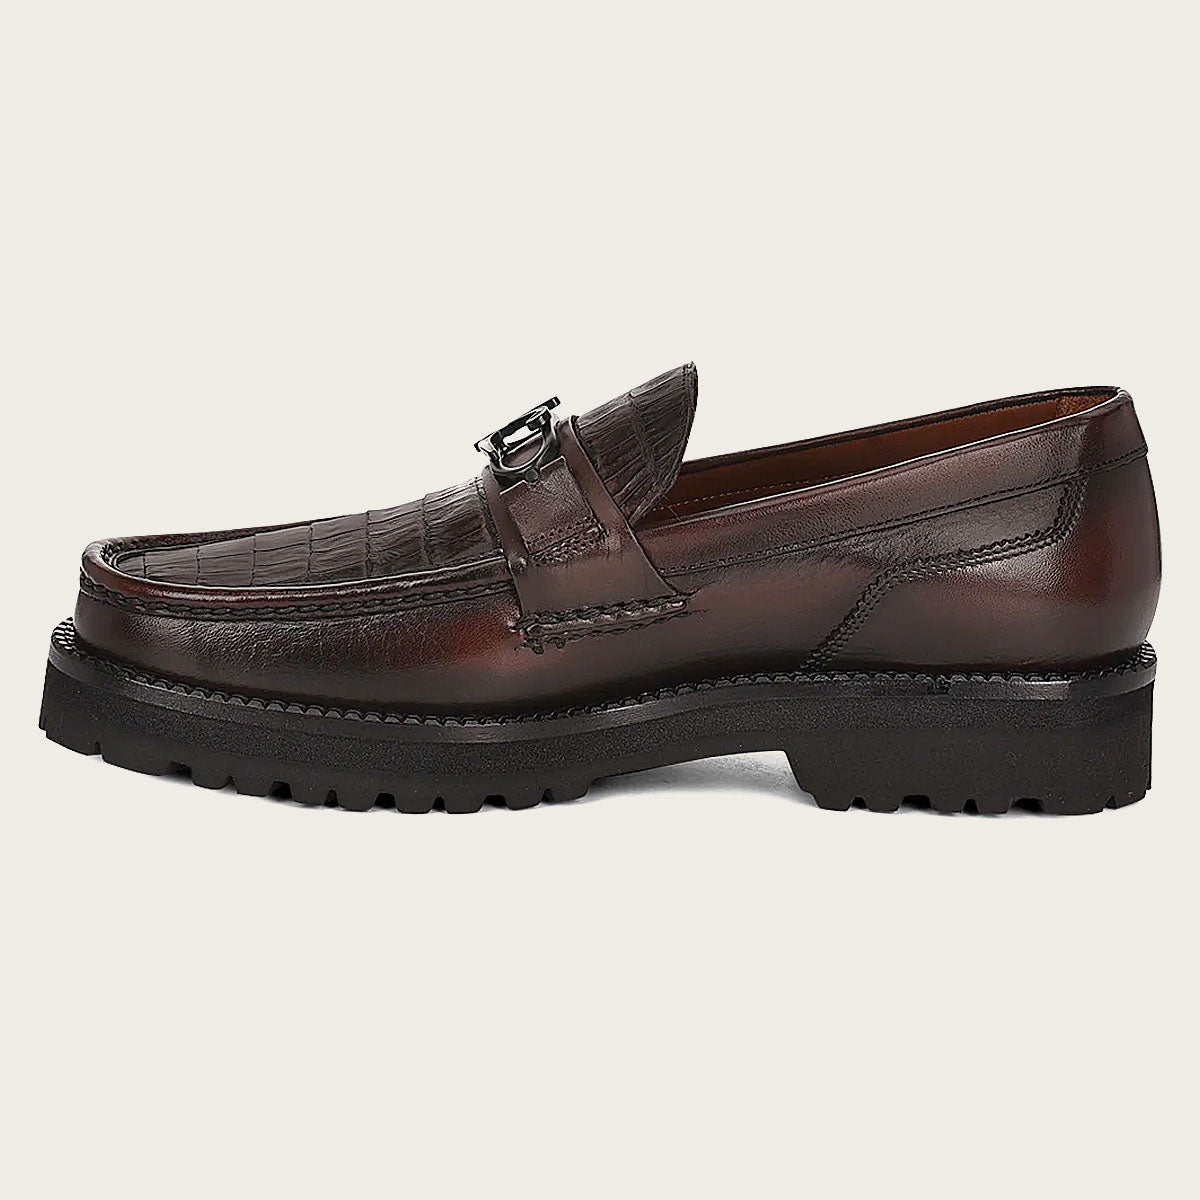 Brown leather men loafer, cayman leather - 2D5CWTS - Cuadra Shop